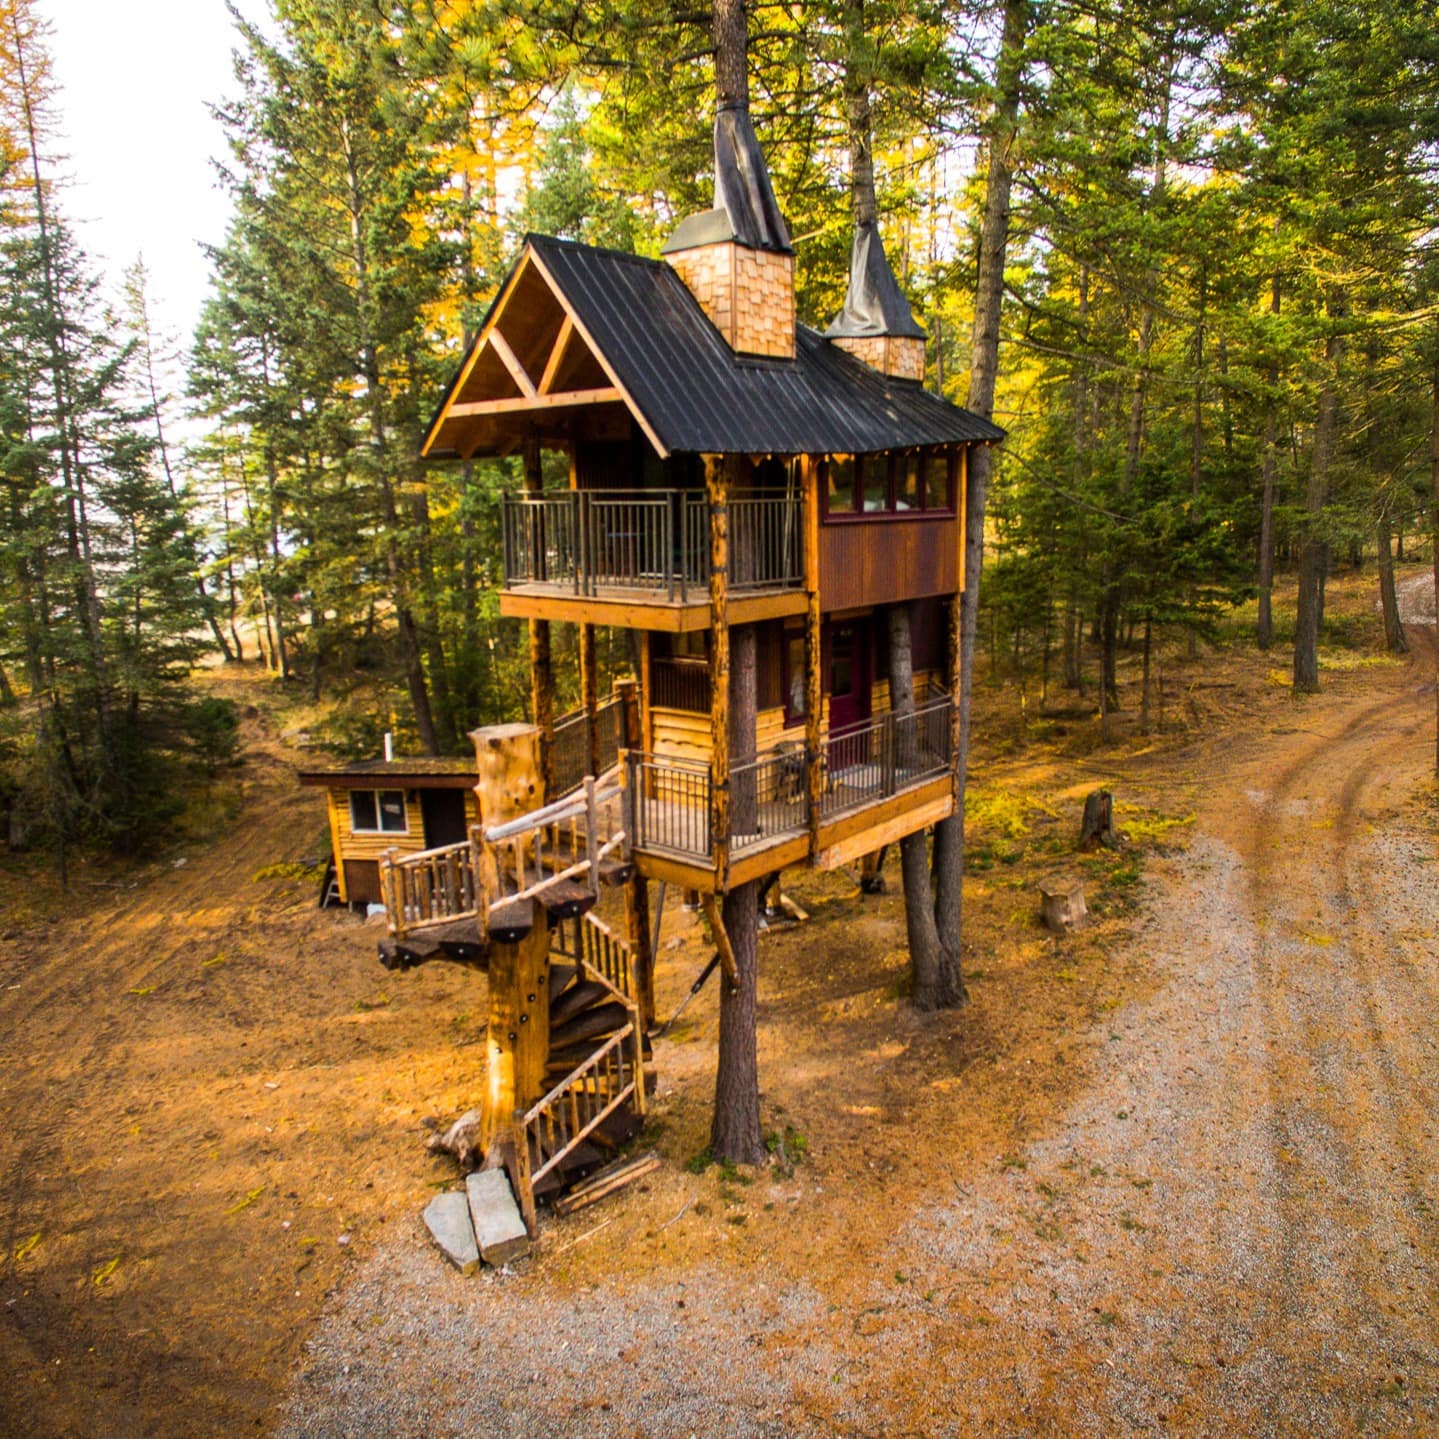 An amazing treehouse glamping rental on two levels with chimneys and spiral staircases